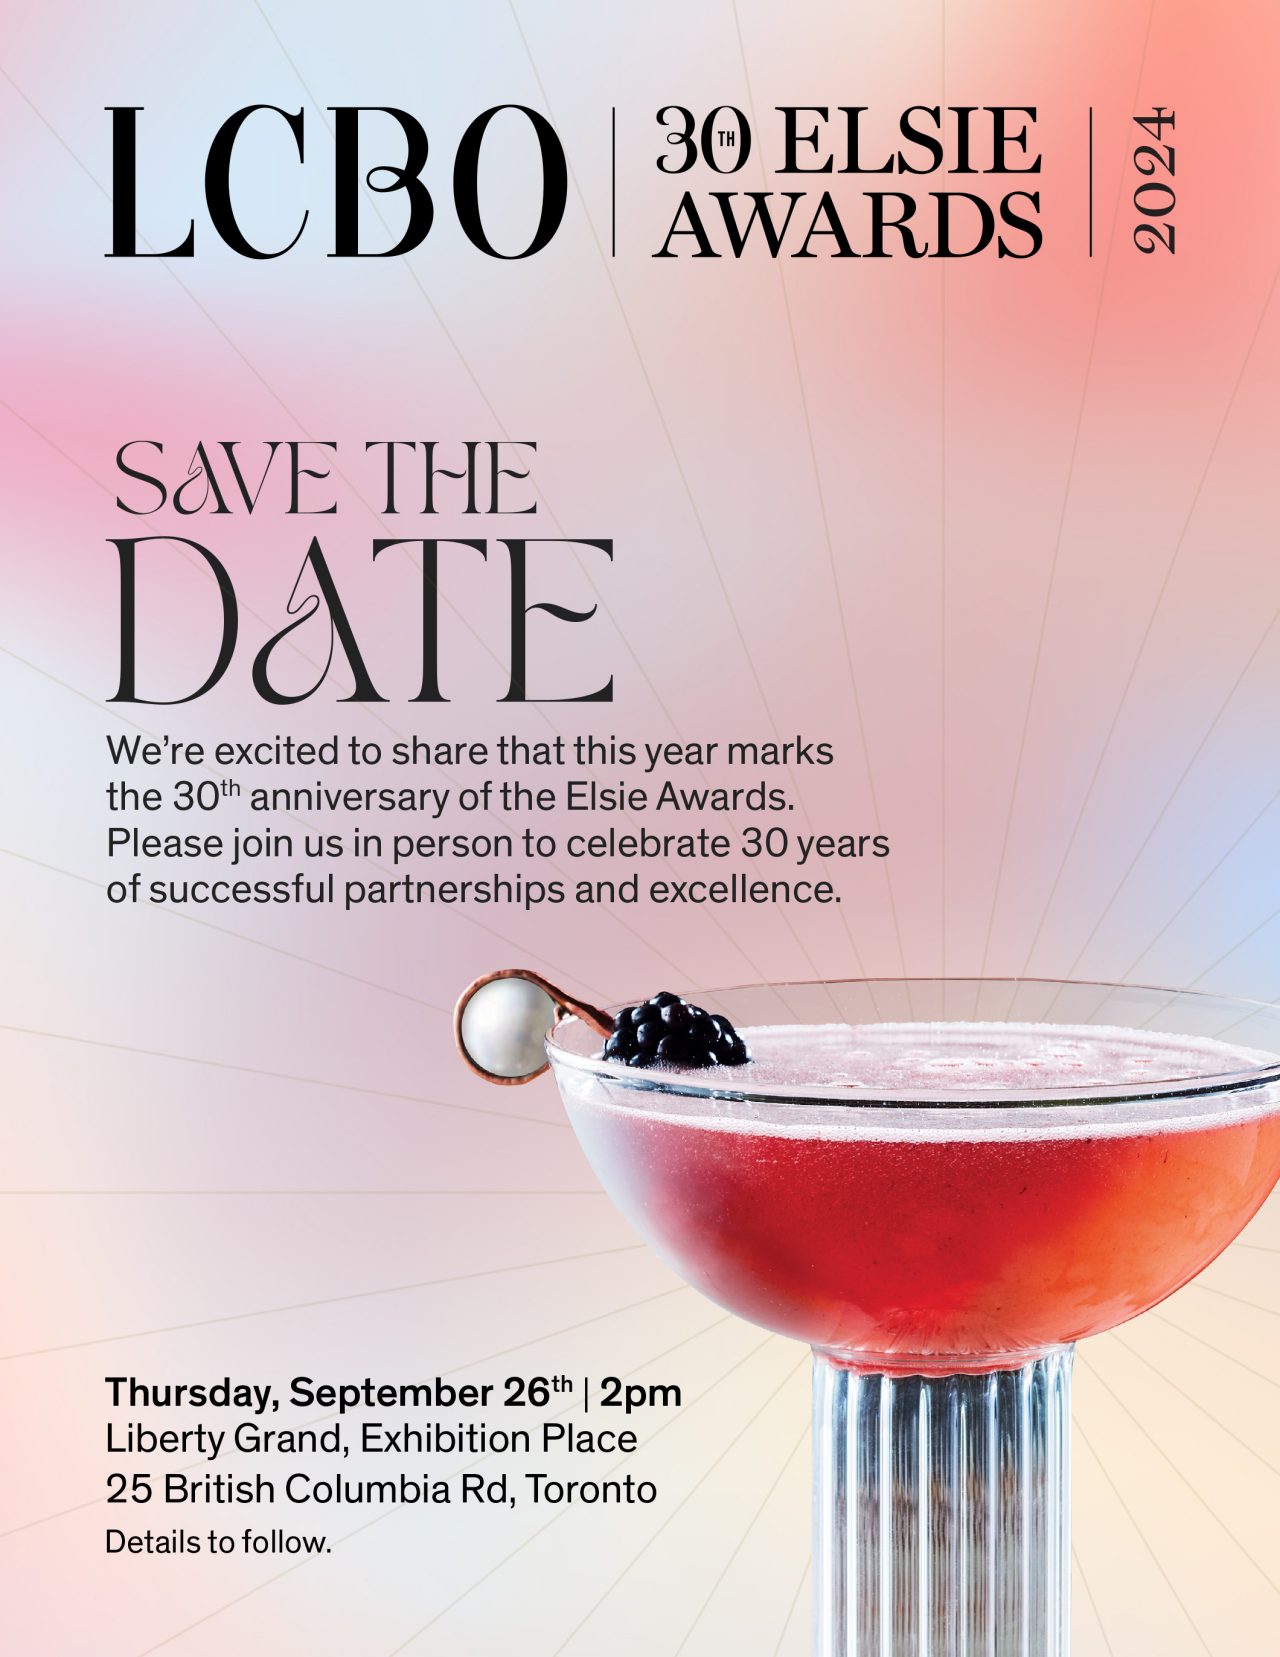 A picture of the Elsie Awards save the date invitation